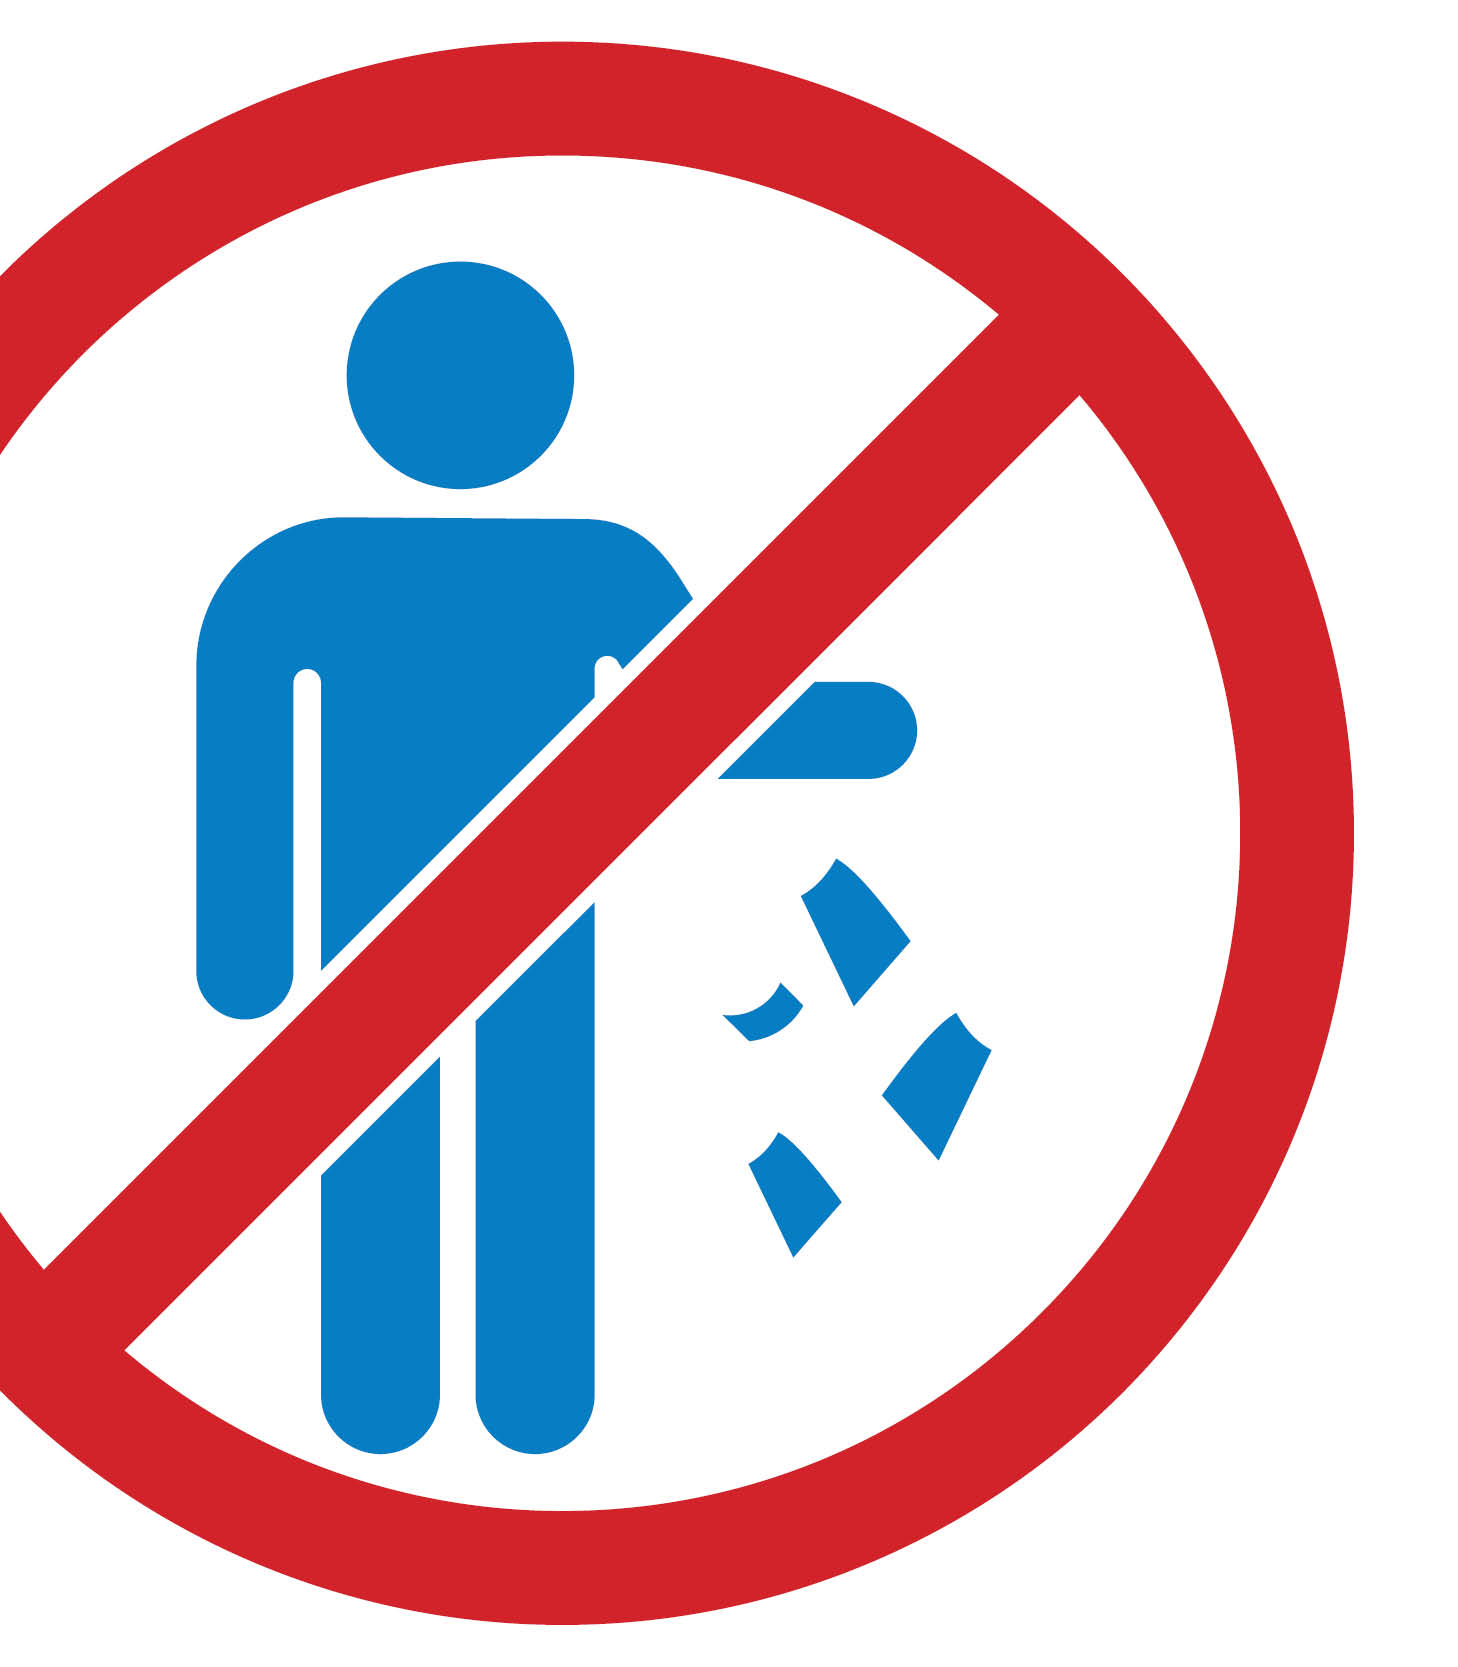 Icon of an anti-littering sign shows a person littering with a red circle and cross out.